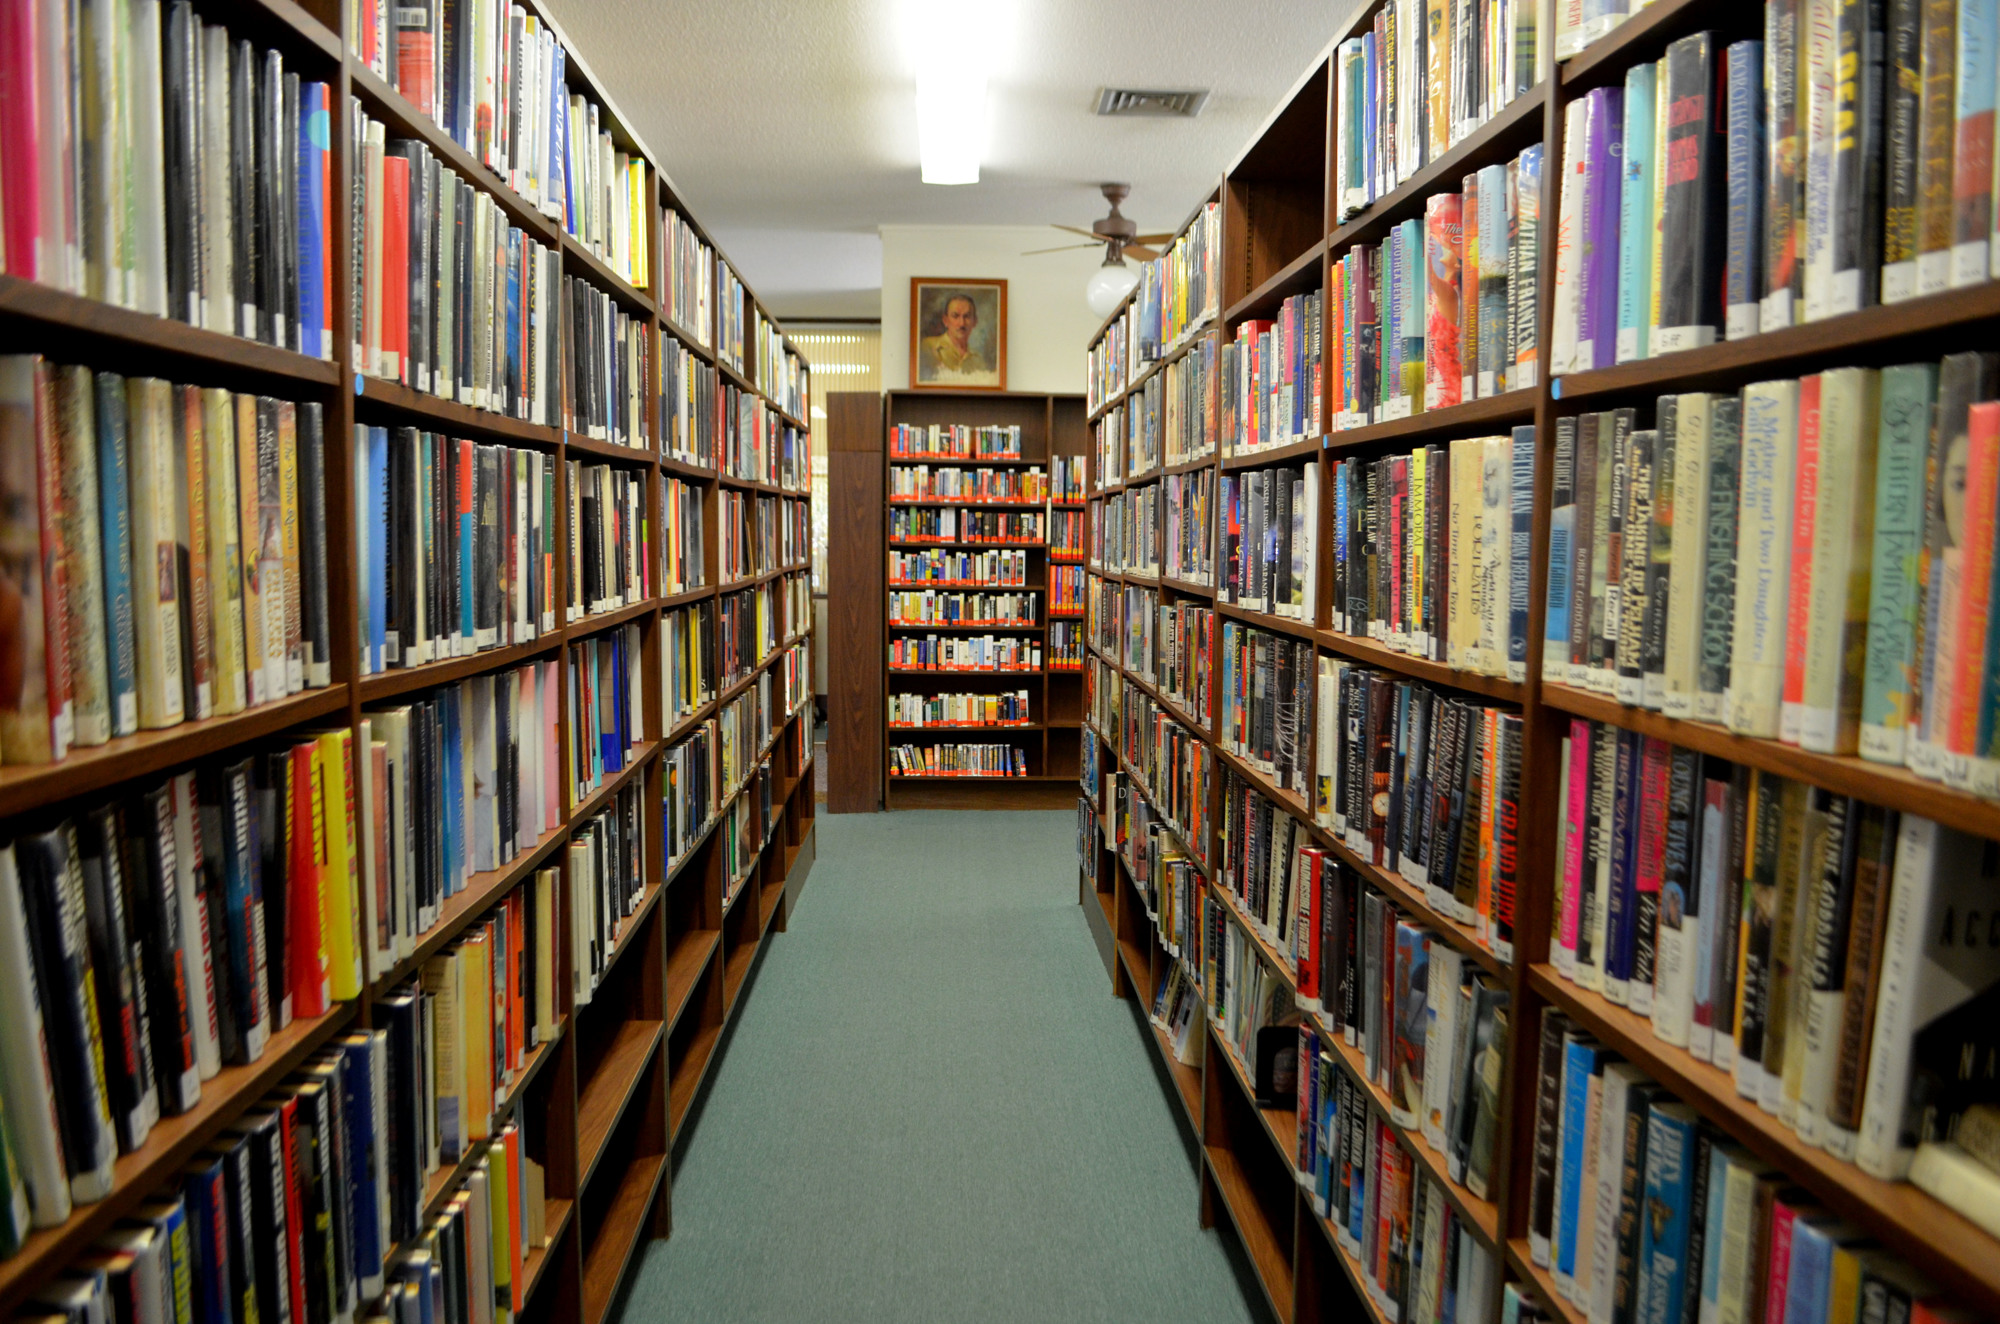 The library has 6,000 books in its current collection. When it was started in 1957, there were only 1,200 books. 